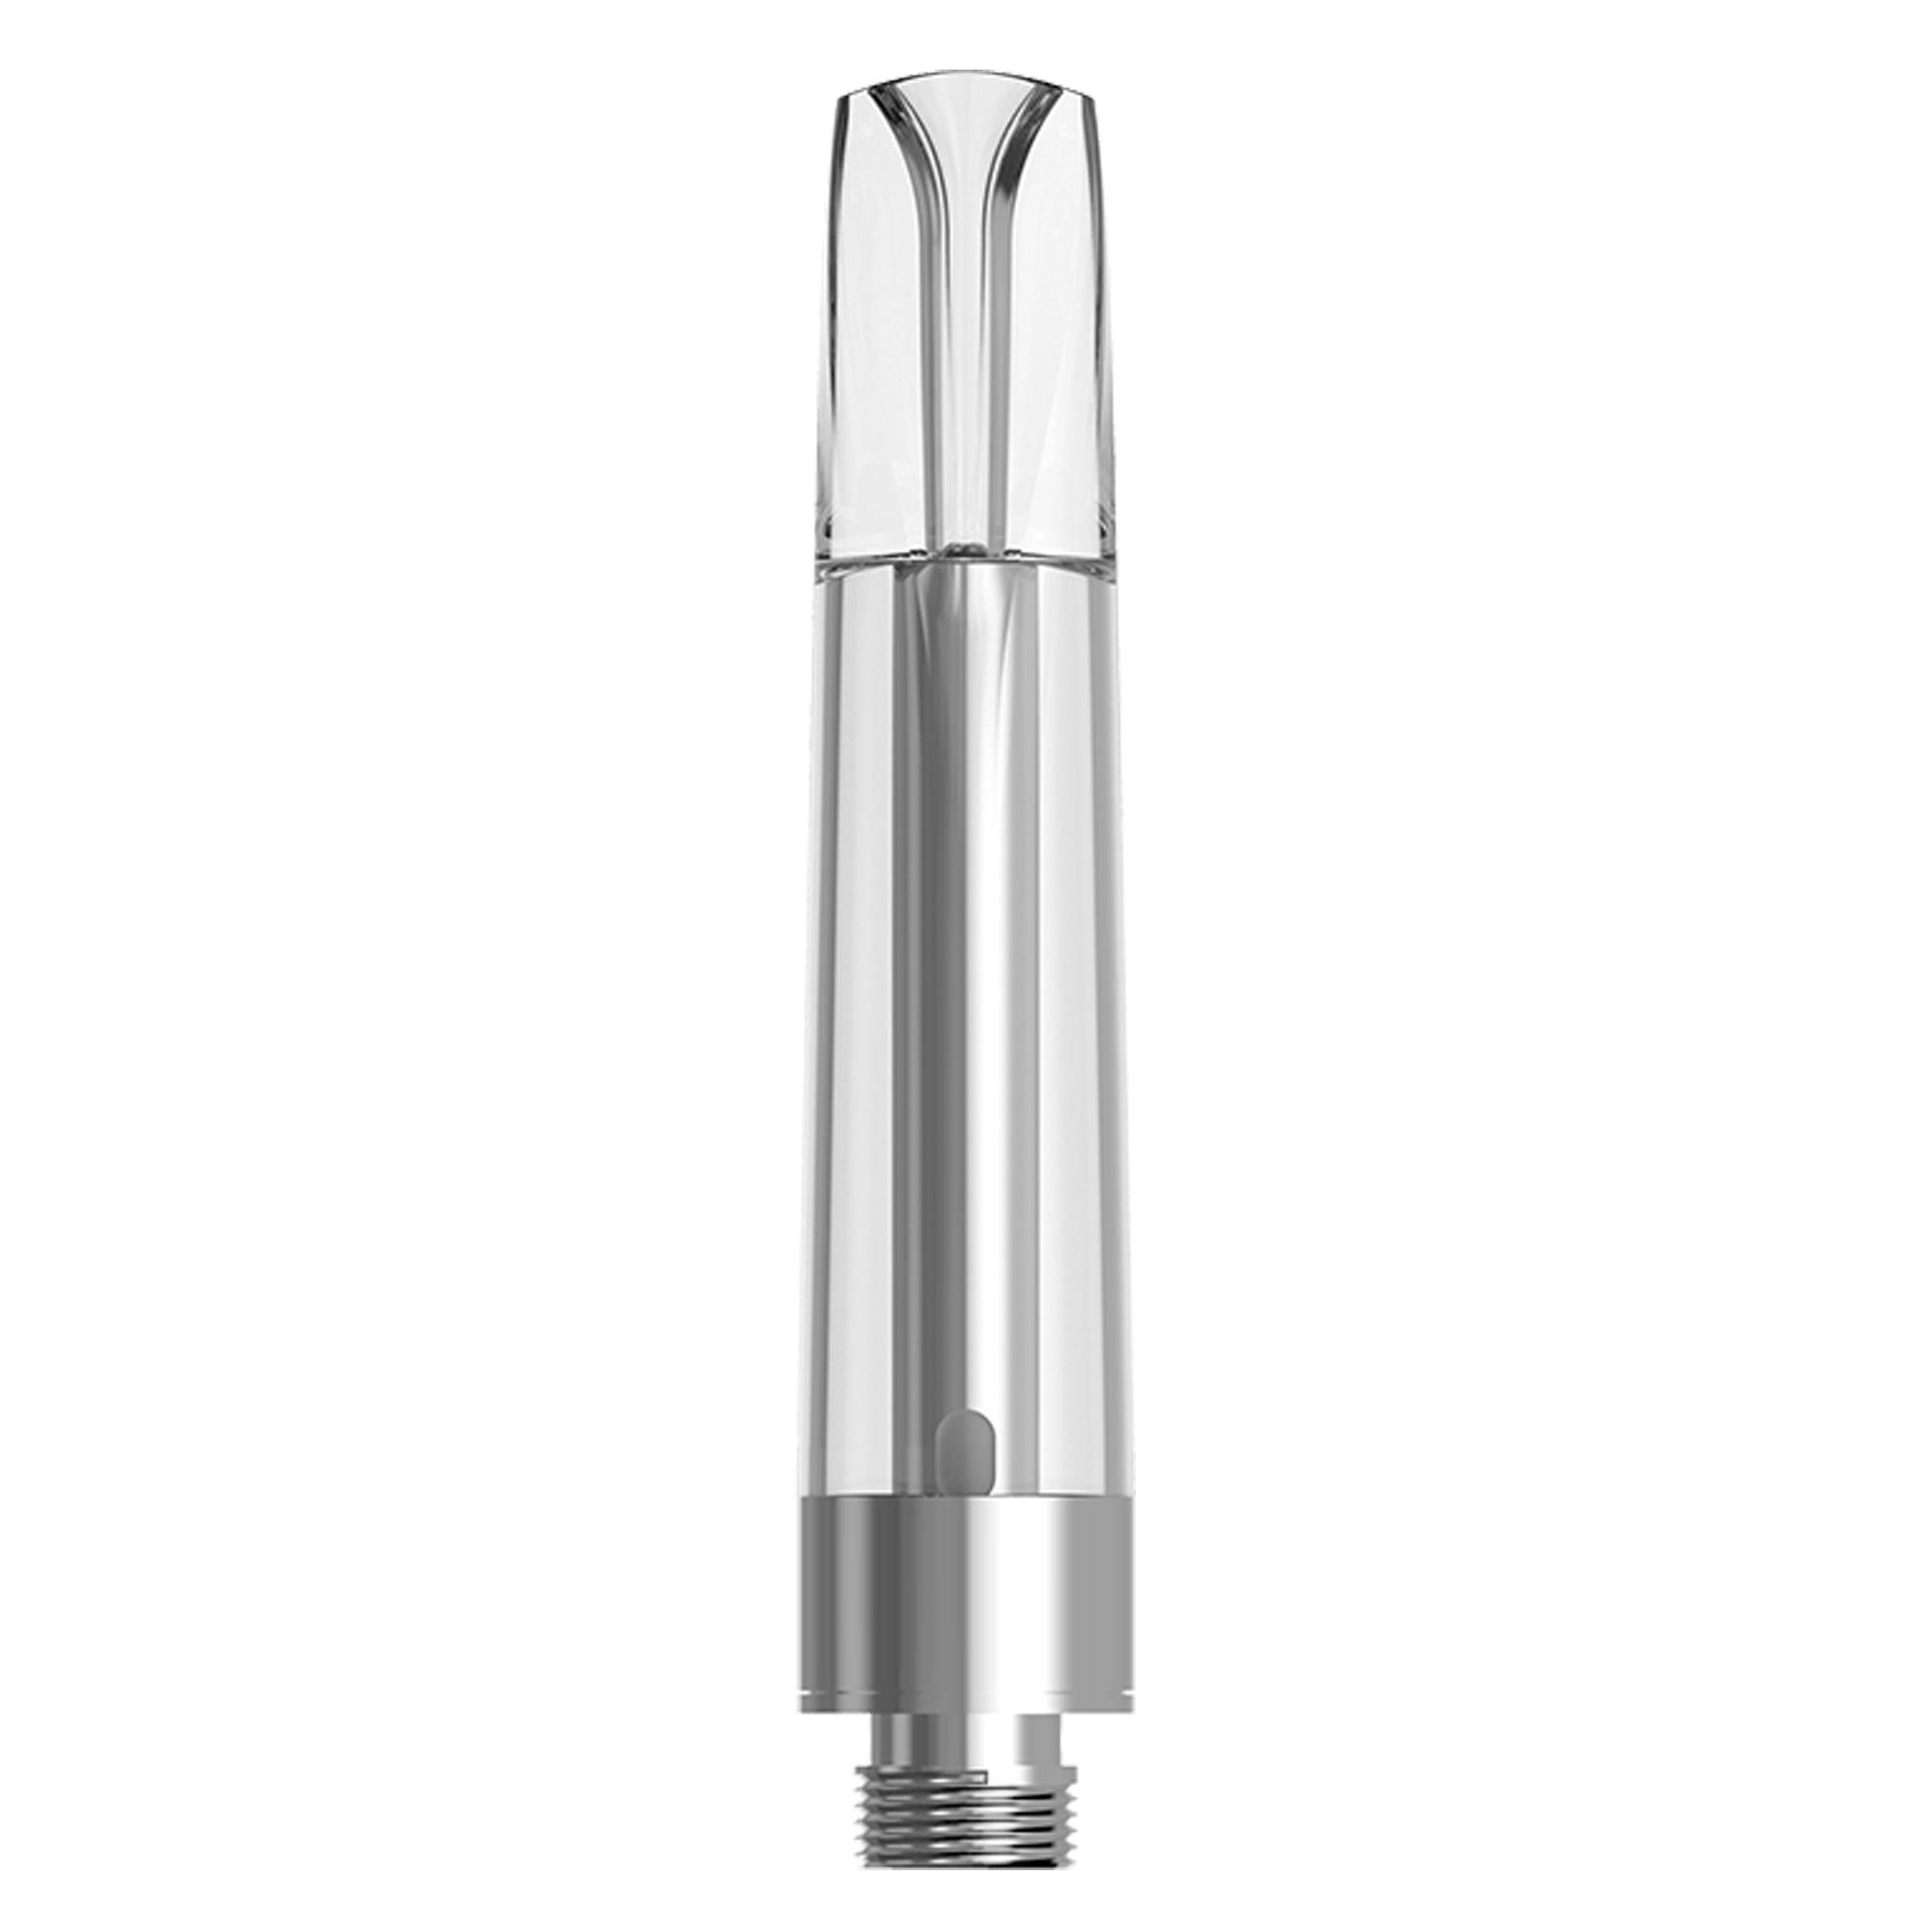 CCELL ZICO 1.0ML OIL CARTRIDGE